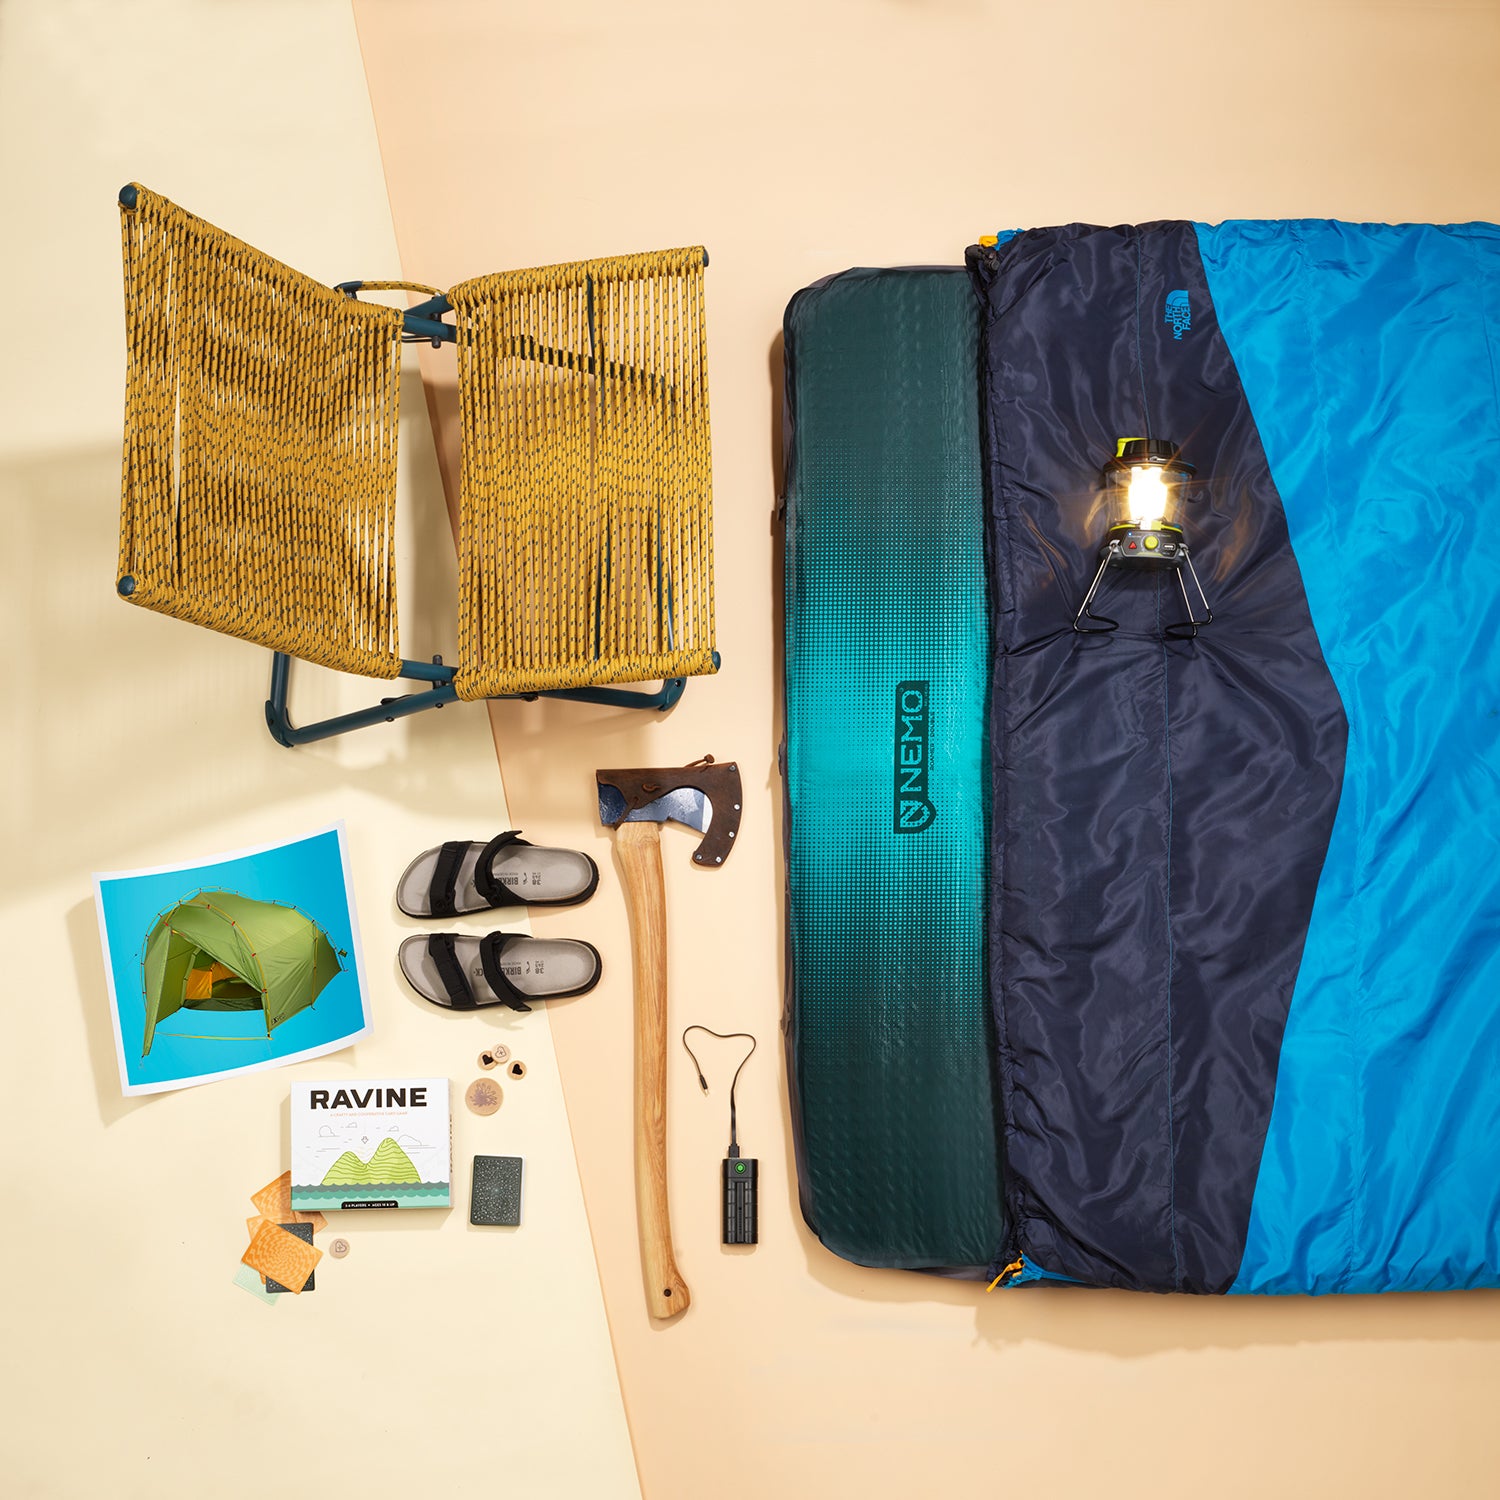 The Best Base Camp Gear of 2021